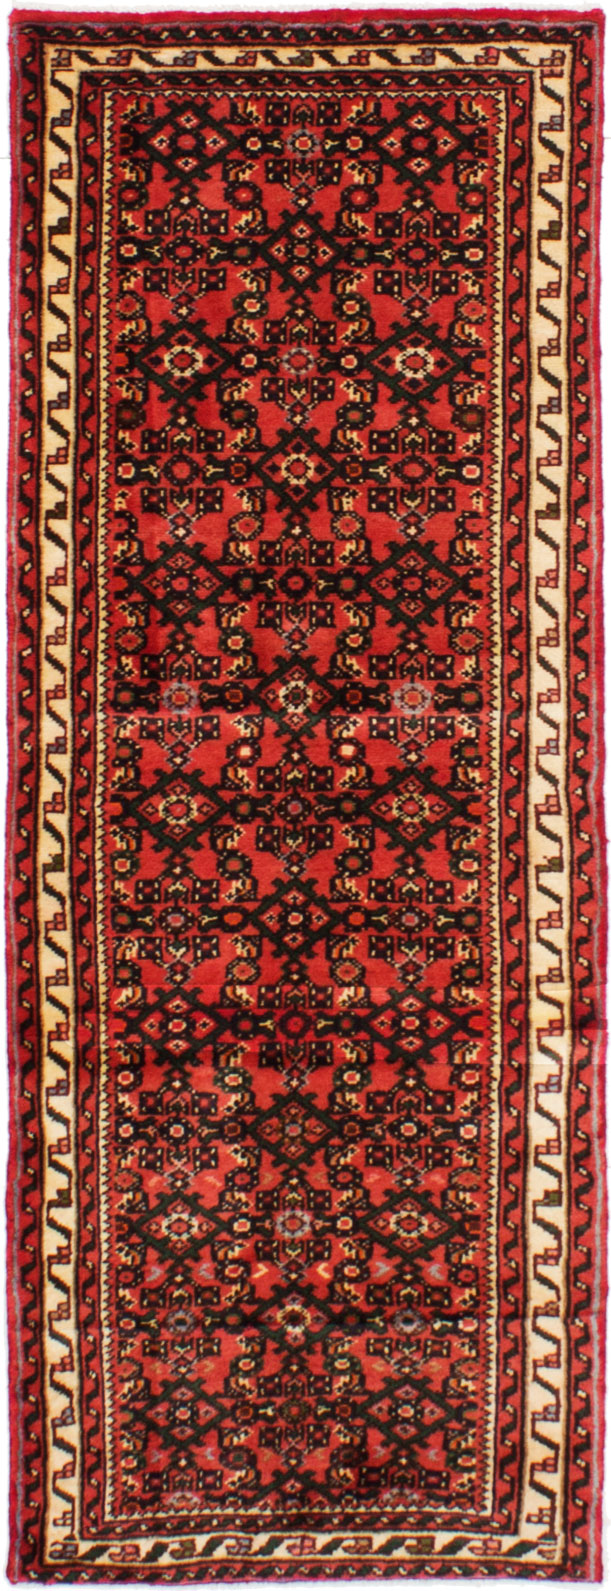 Hand-knotted Hosseinabad Dark Copper Wool Rug 2'3" x 6'2" Size: 2'3" x 6'2"  